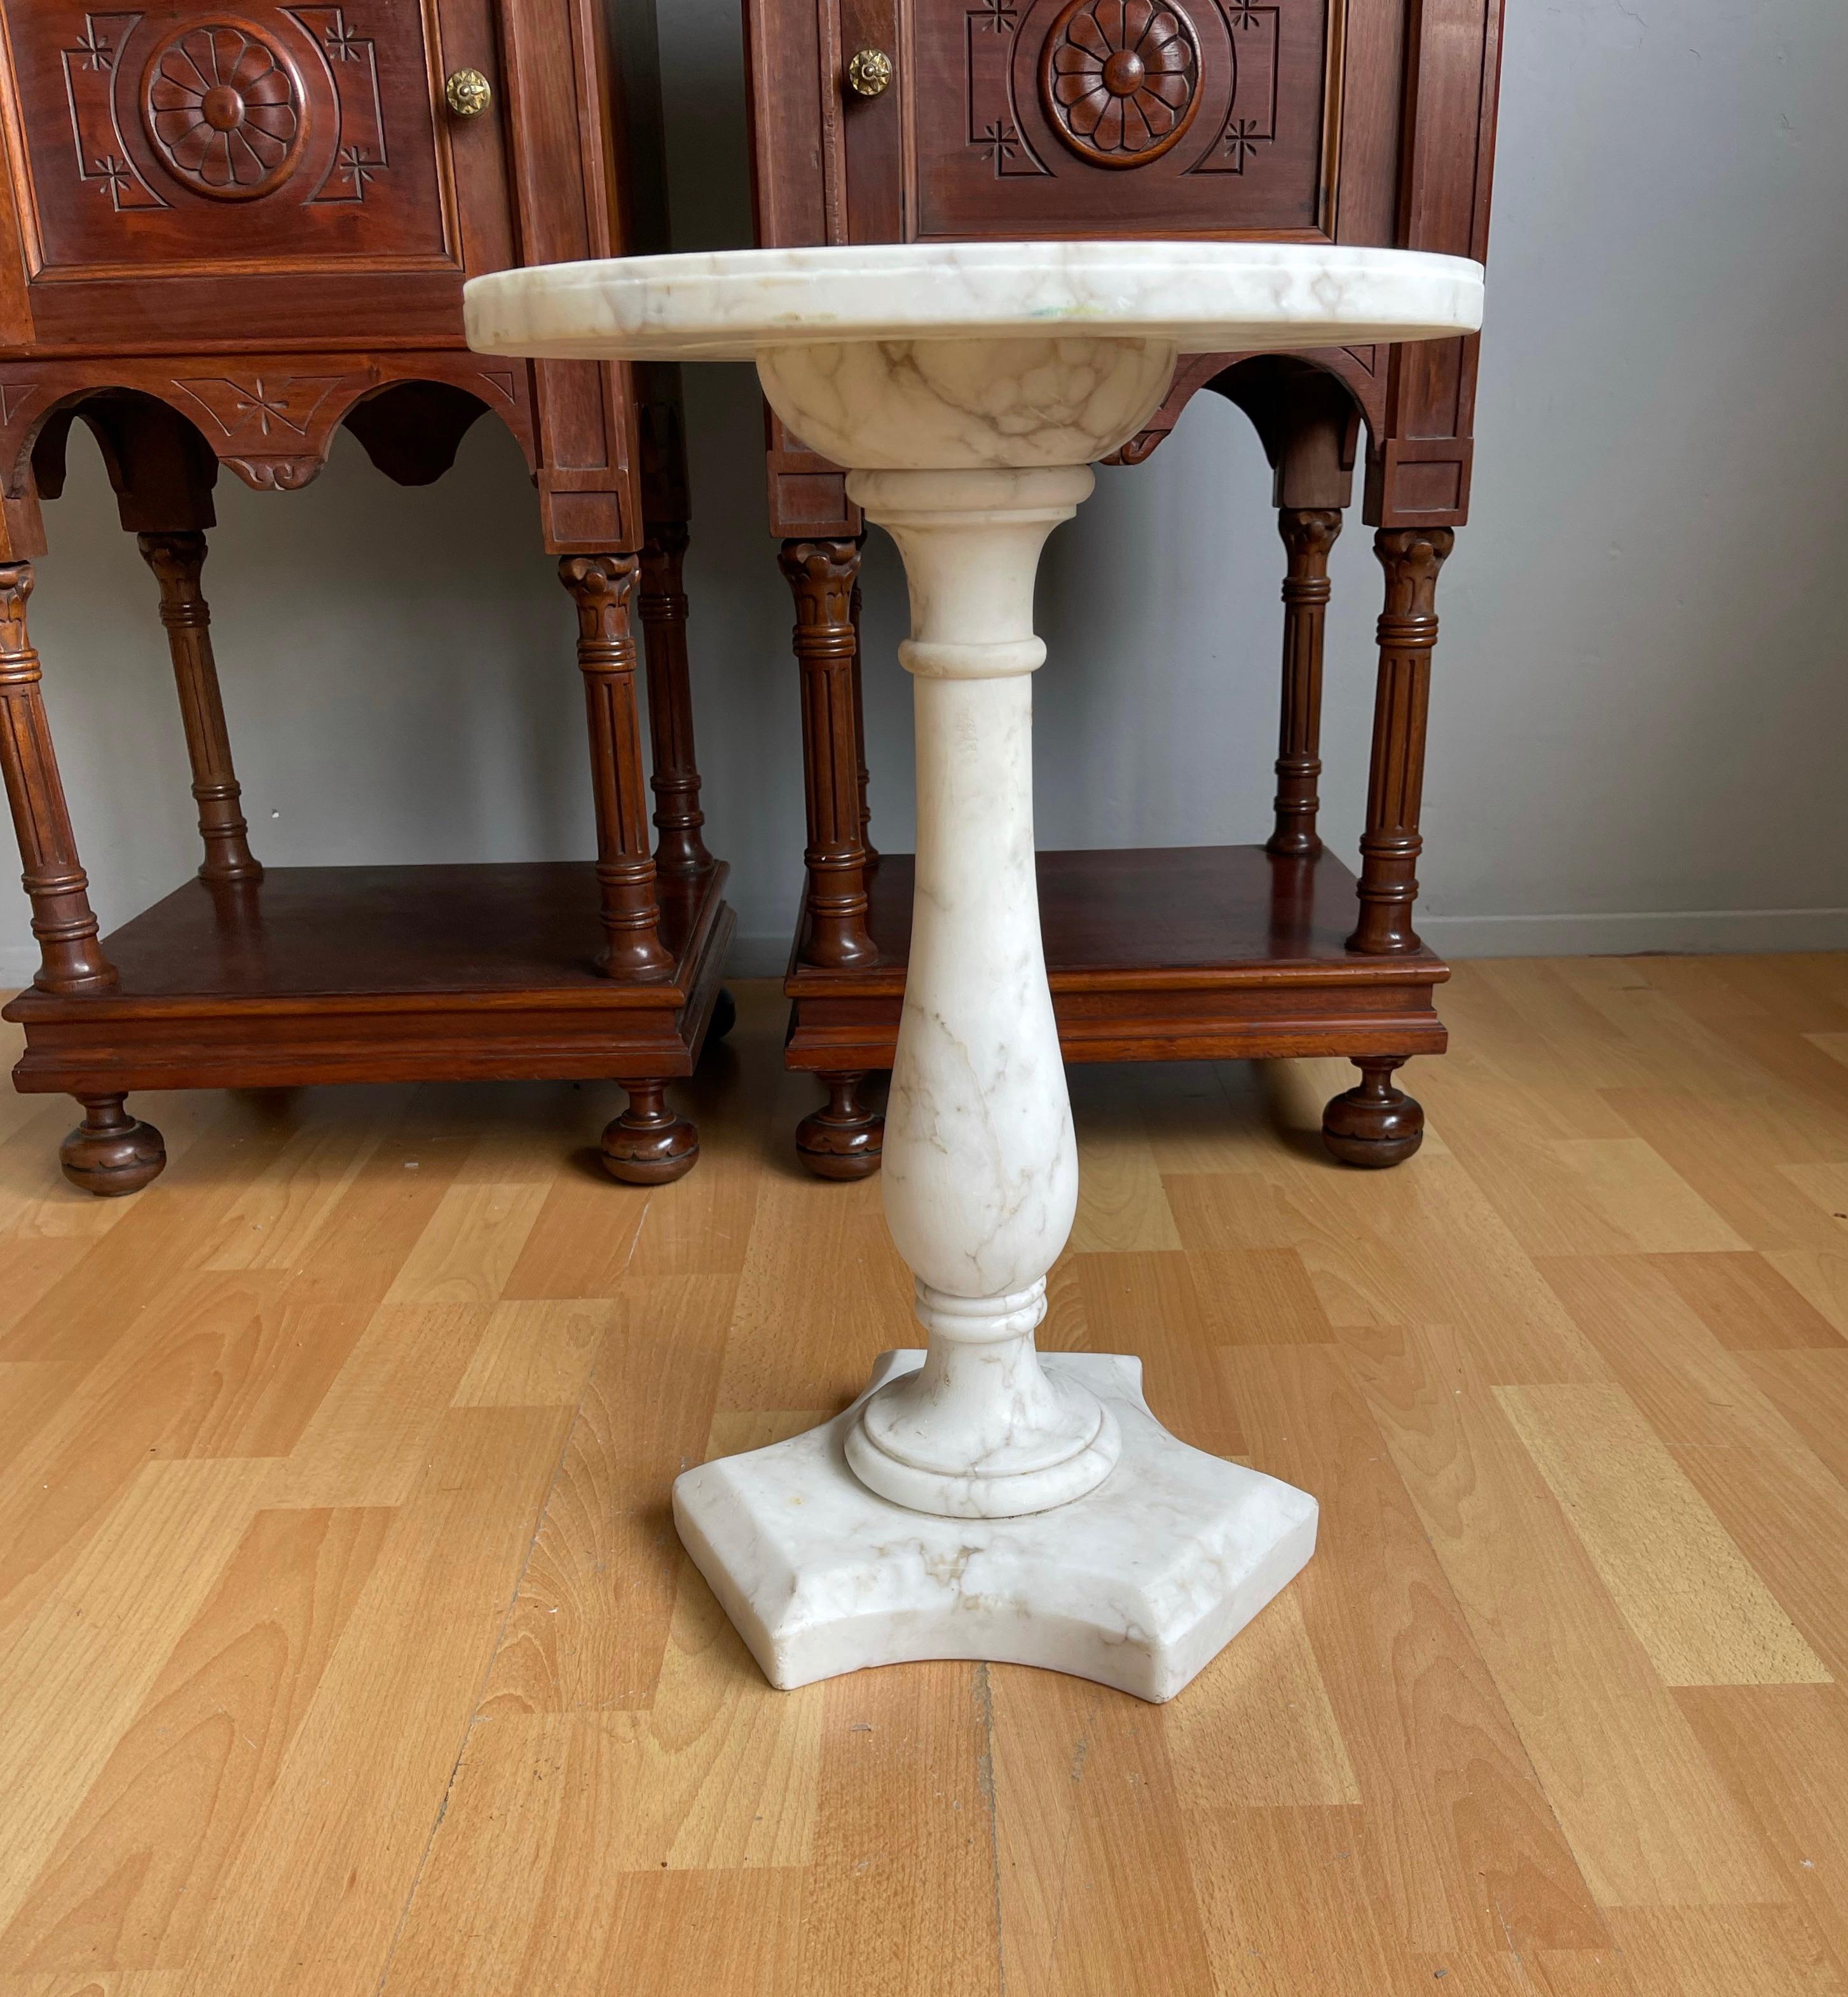 Italian Design Midcentury Modern White Carrara Marble Pedestal Stand / End Table For Sale 11